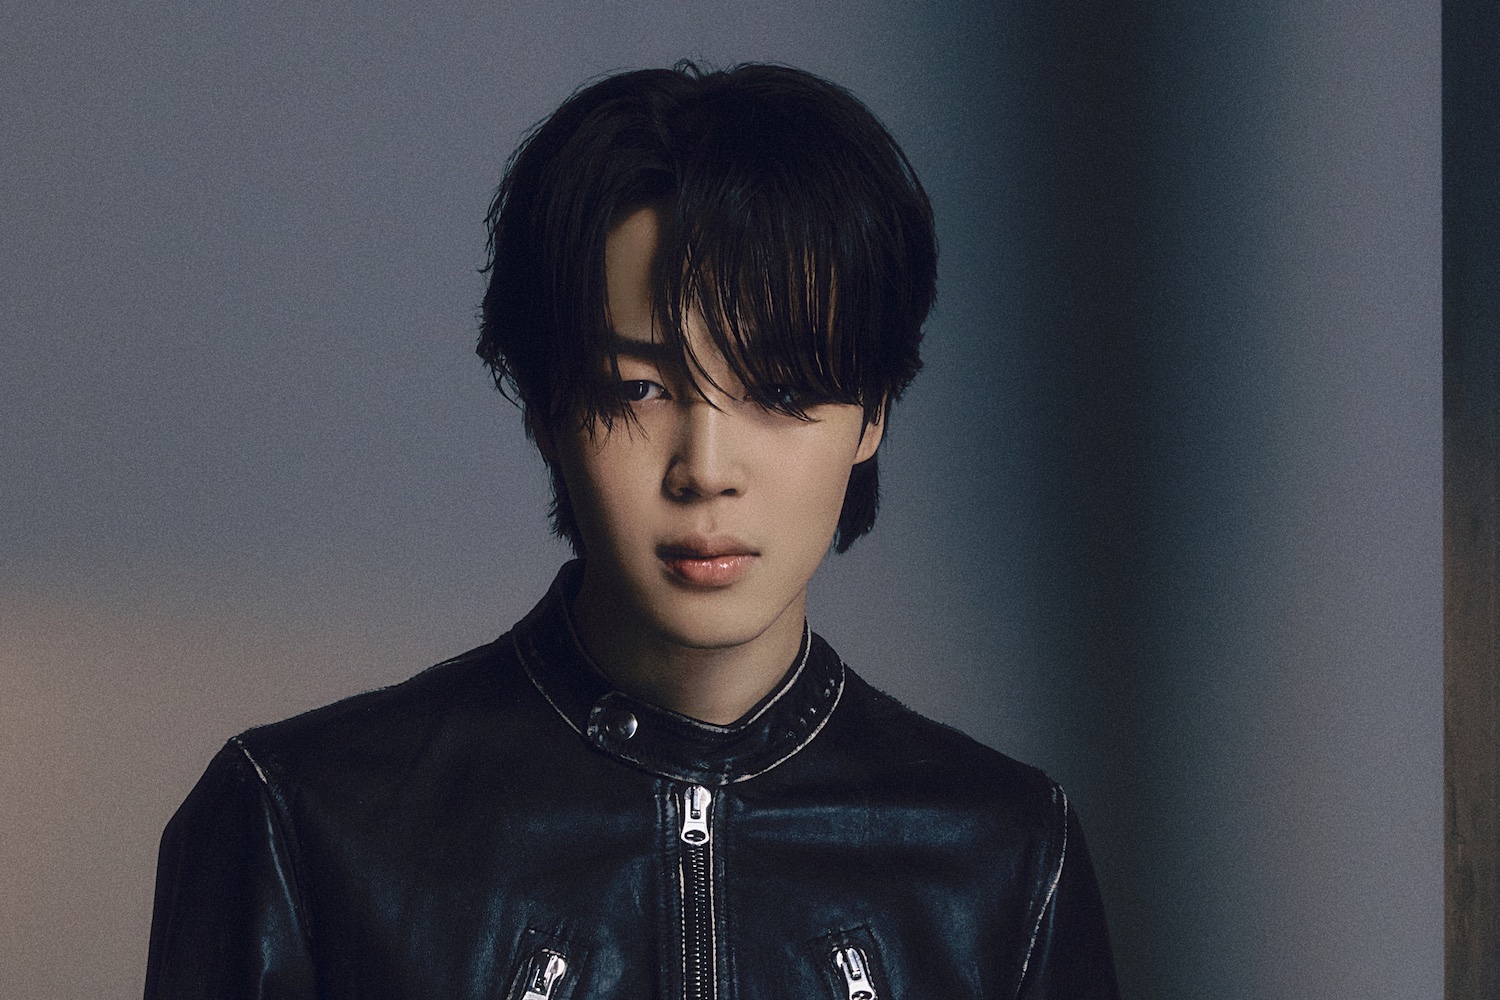 Wrote this one well': BTS' Jimin picks favorite lines from FACE's